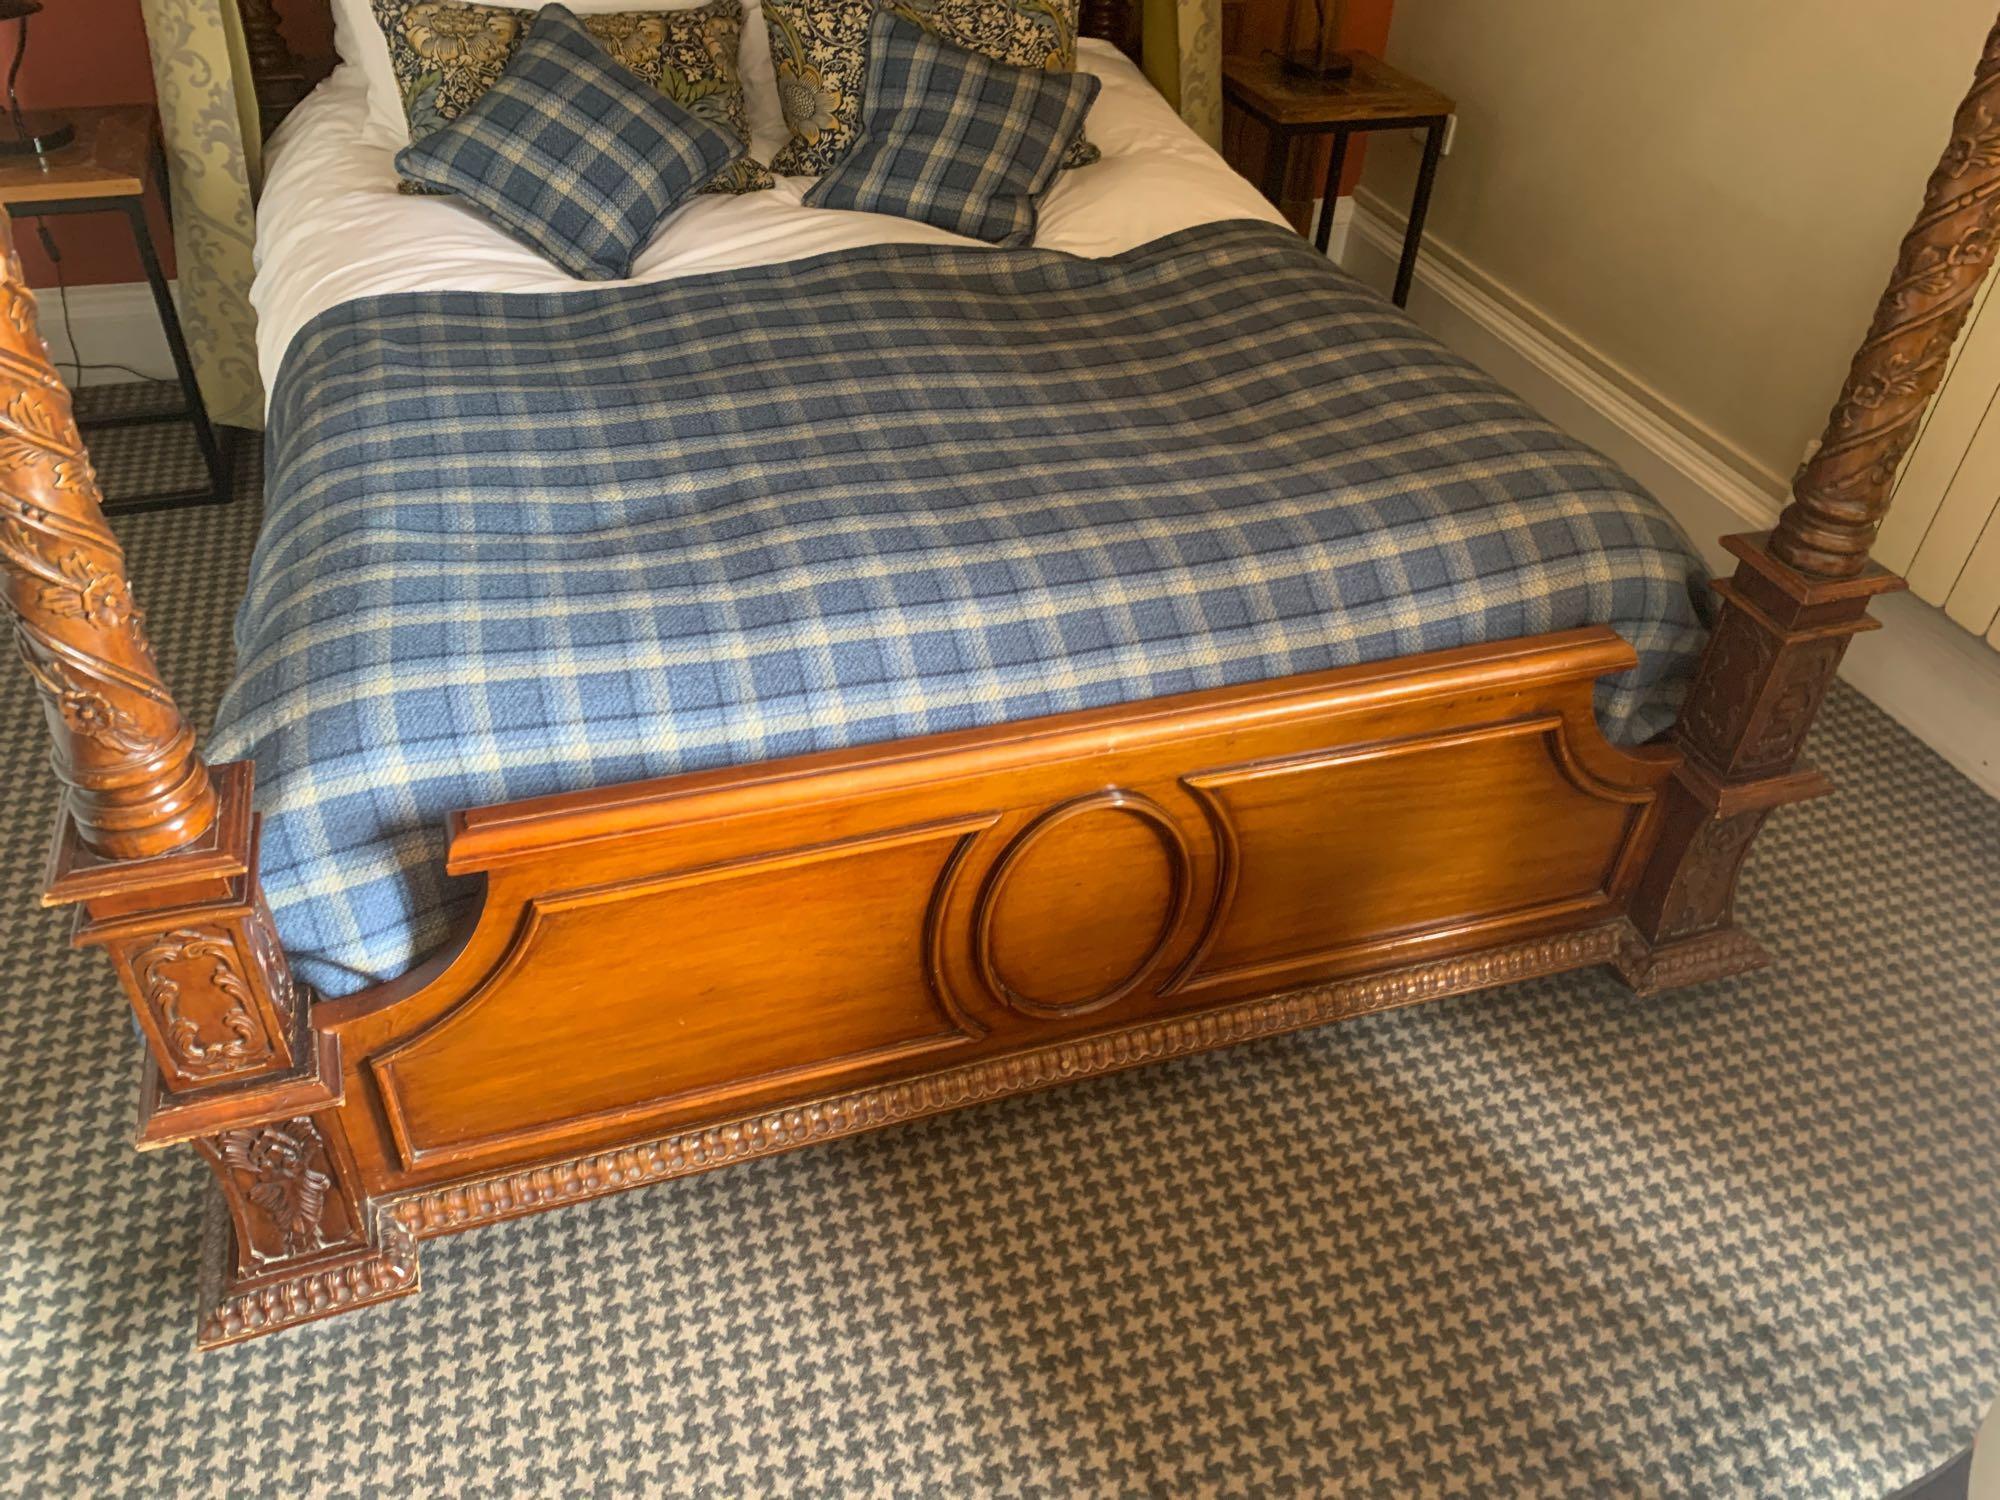 Mahogany Carved 4 Poster Bed Complete With Canopy Antique French Style Bed With Dressed Column Posts - Image 3 of 5